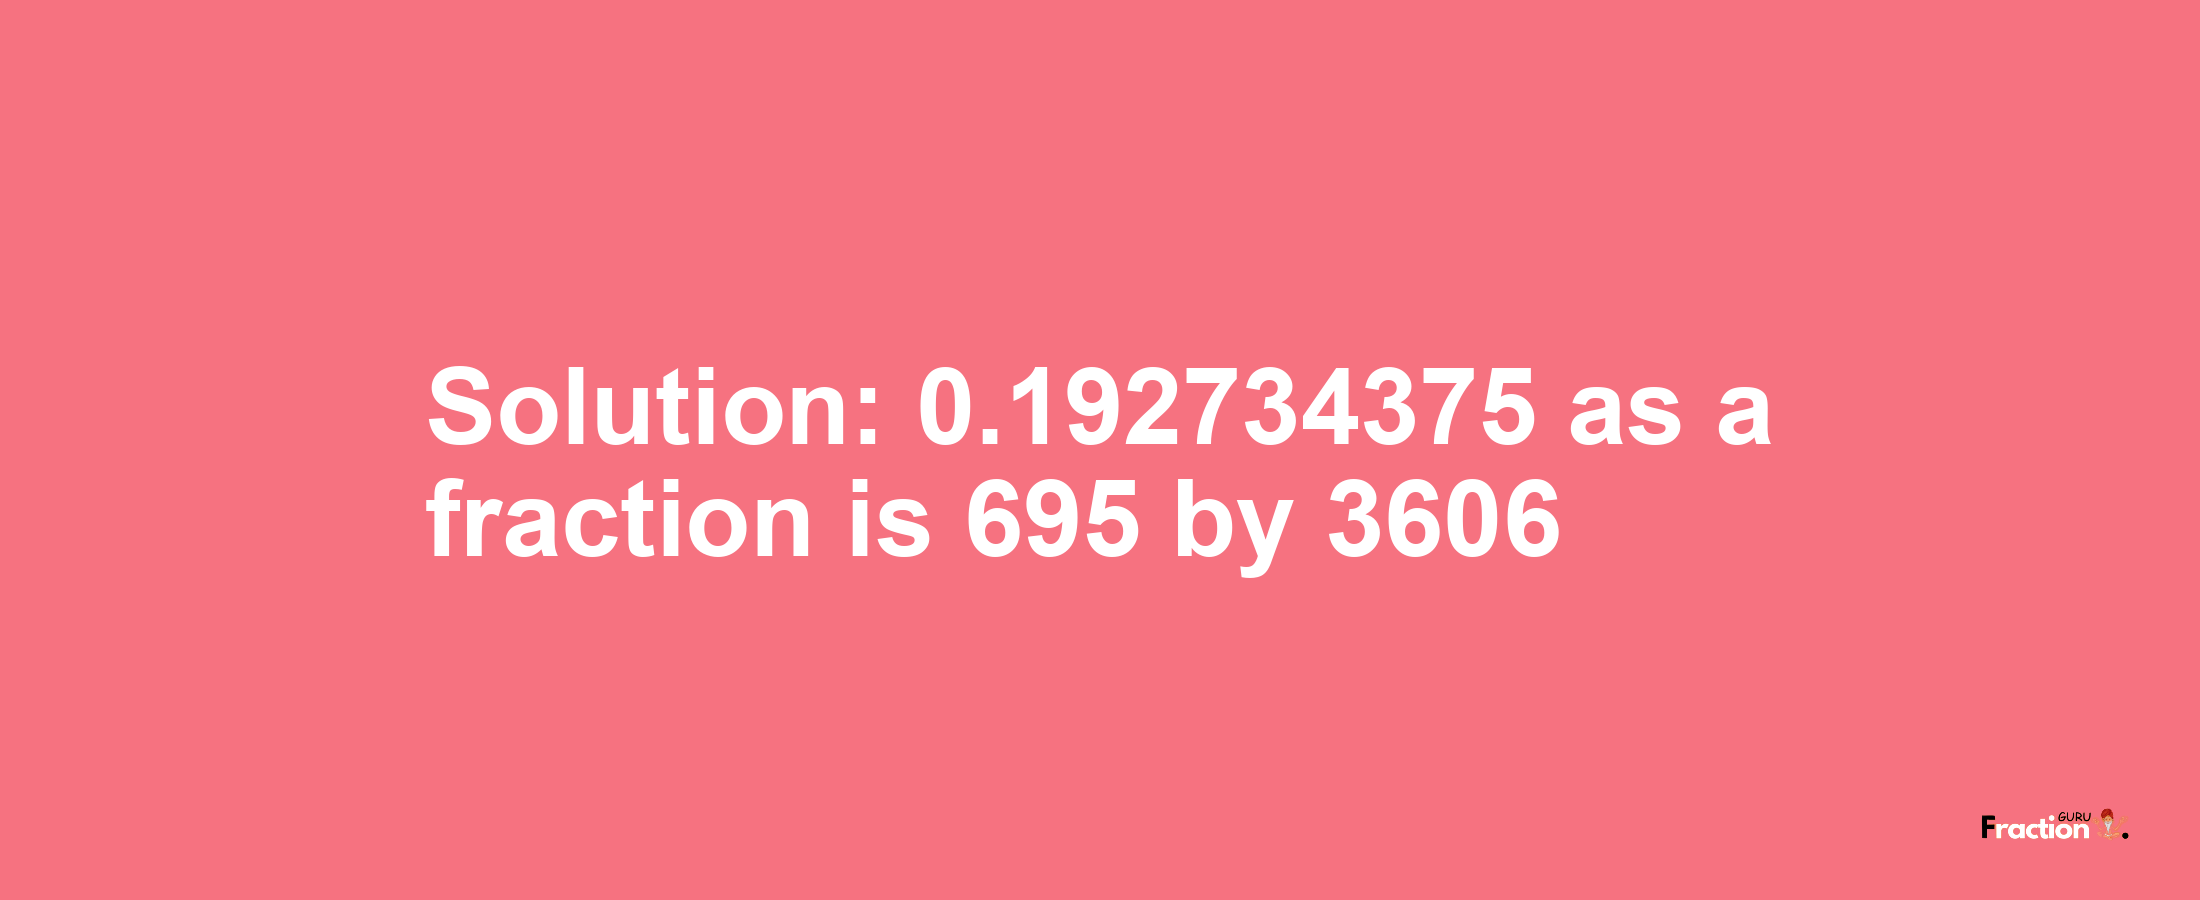 Solution:0.192734375 as a fraction is 695/3606